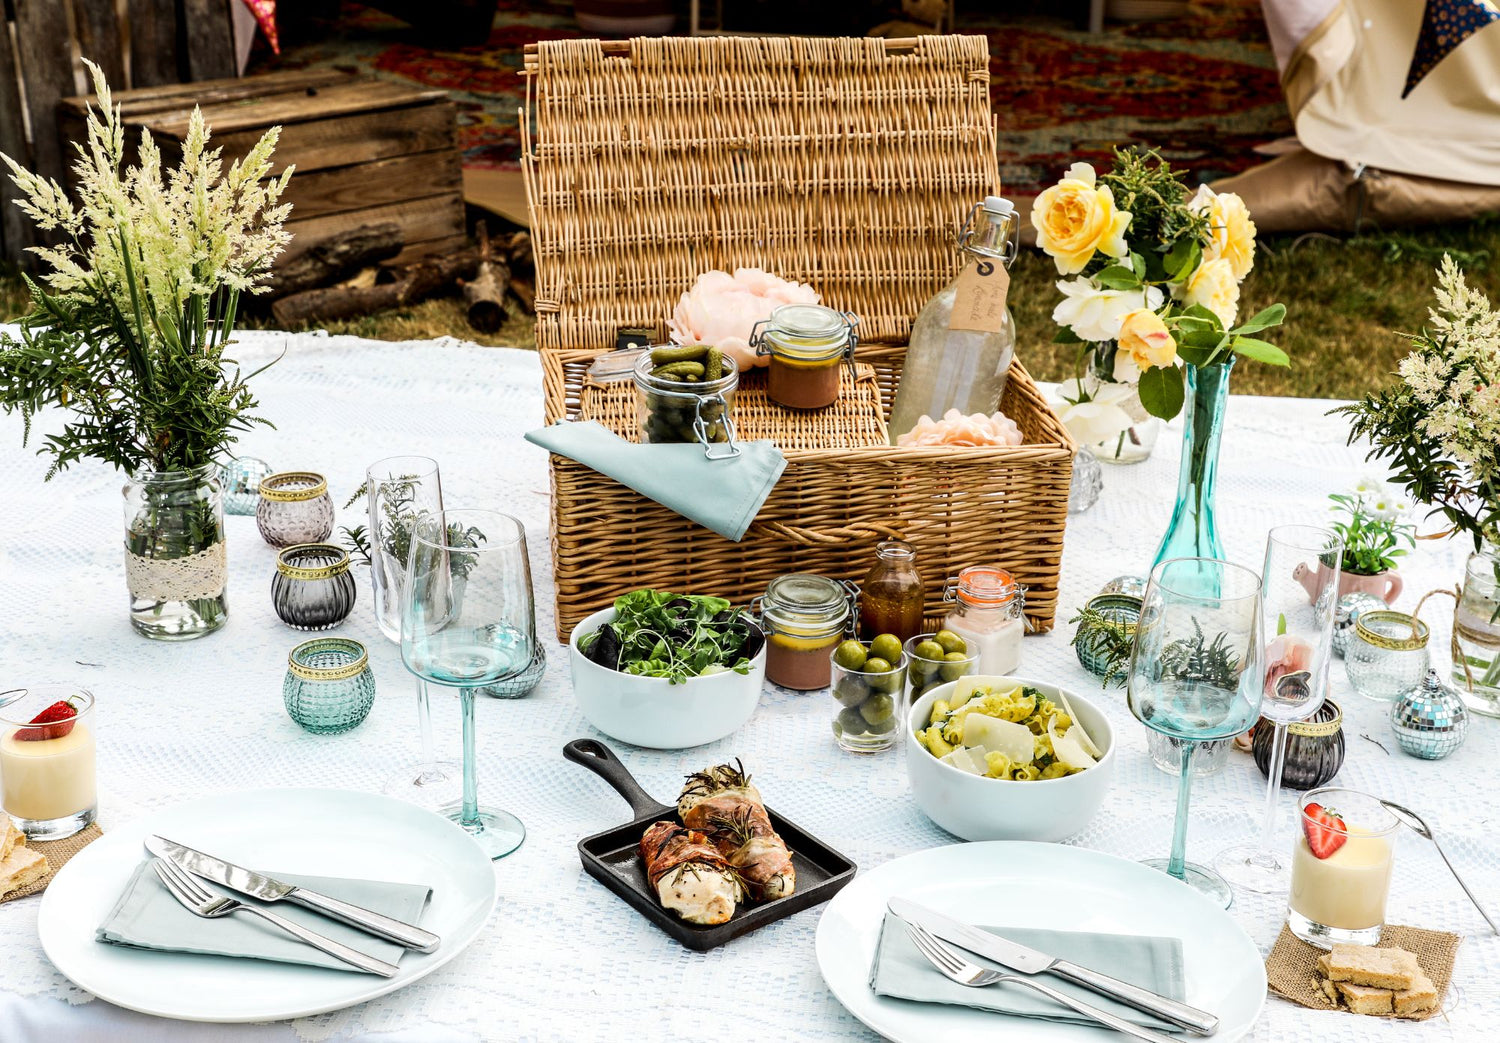 Al Fresco Dining: Tips and Recipes for Memorable Outdoor Summer Entertaining